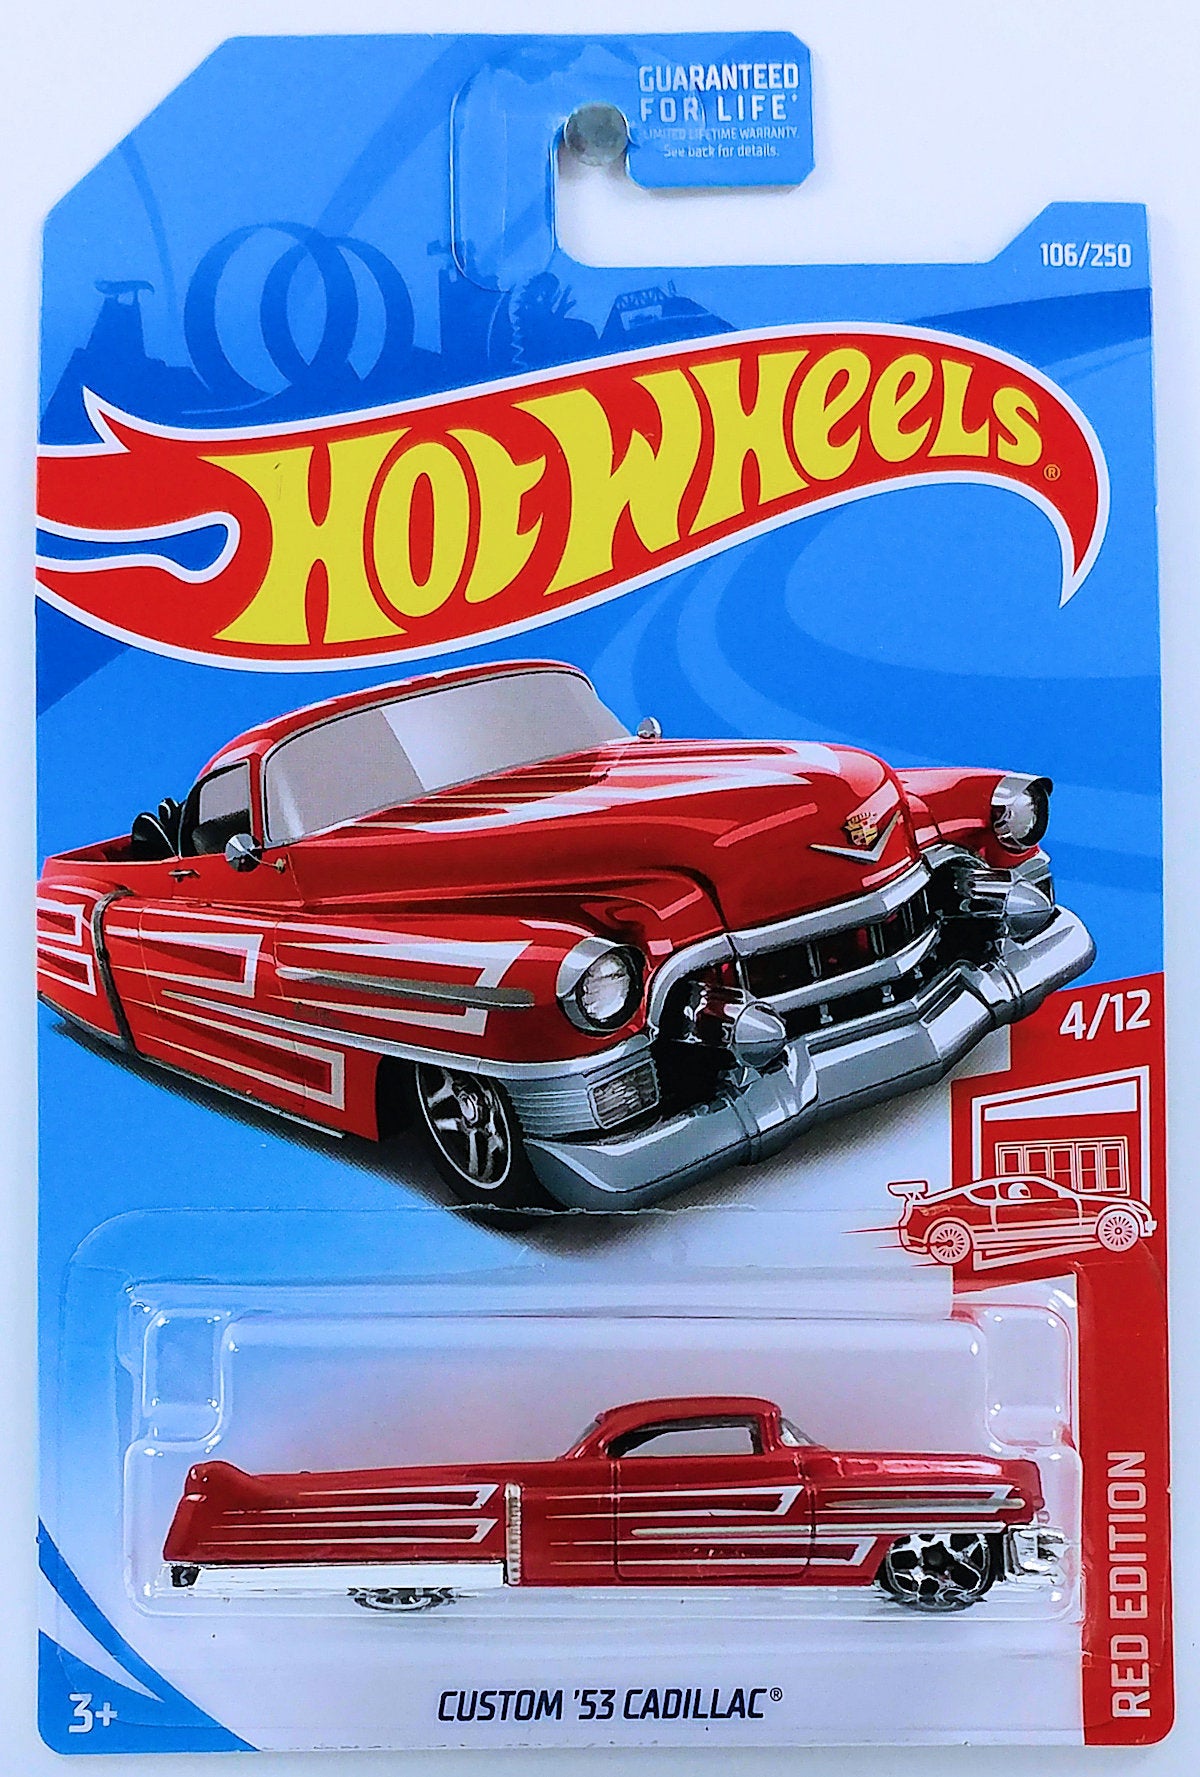 Hot Wheels 2019 - Collector # 106/250 - Red Edition 4/12 - Custom '53 Cadillac - Red - USA Card - Target Exclusive